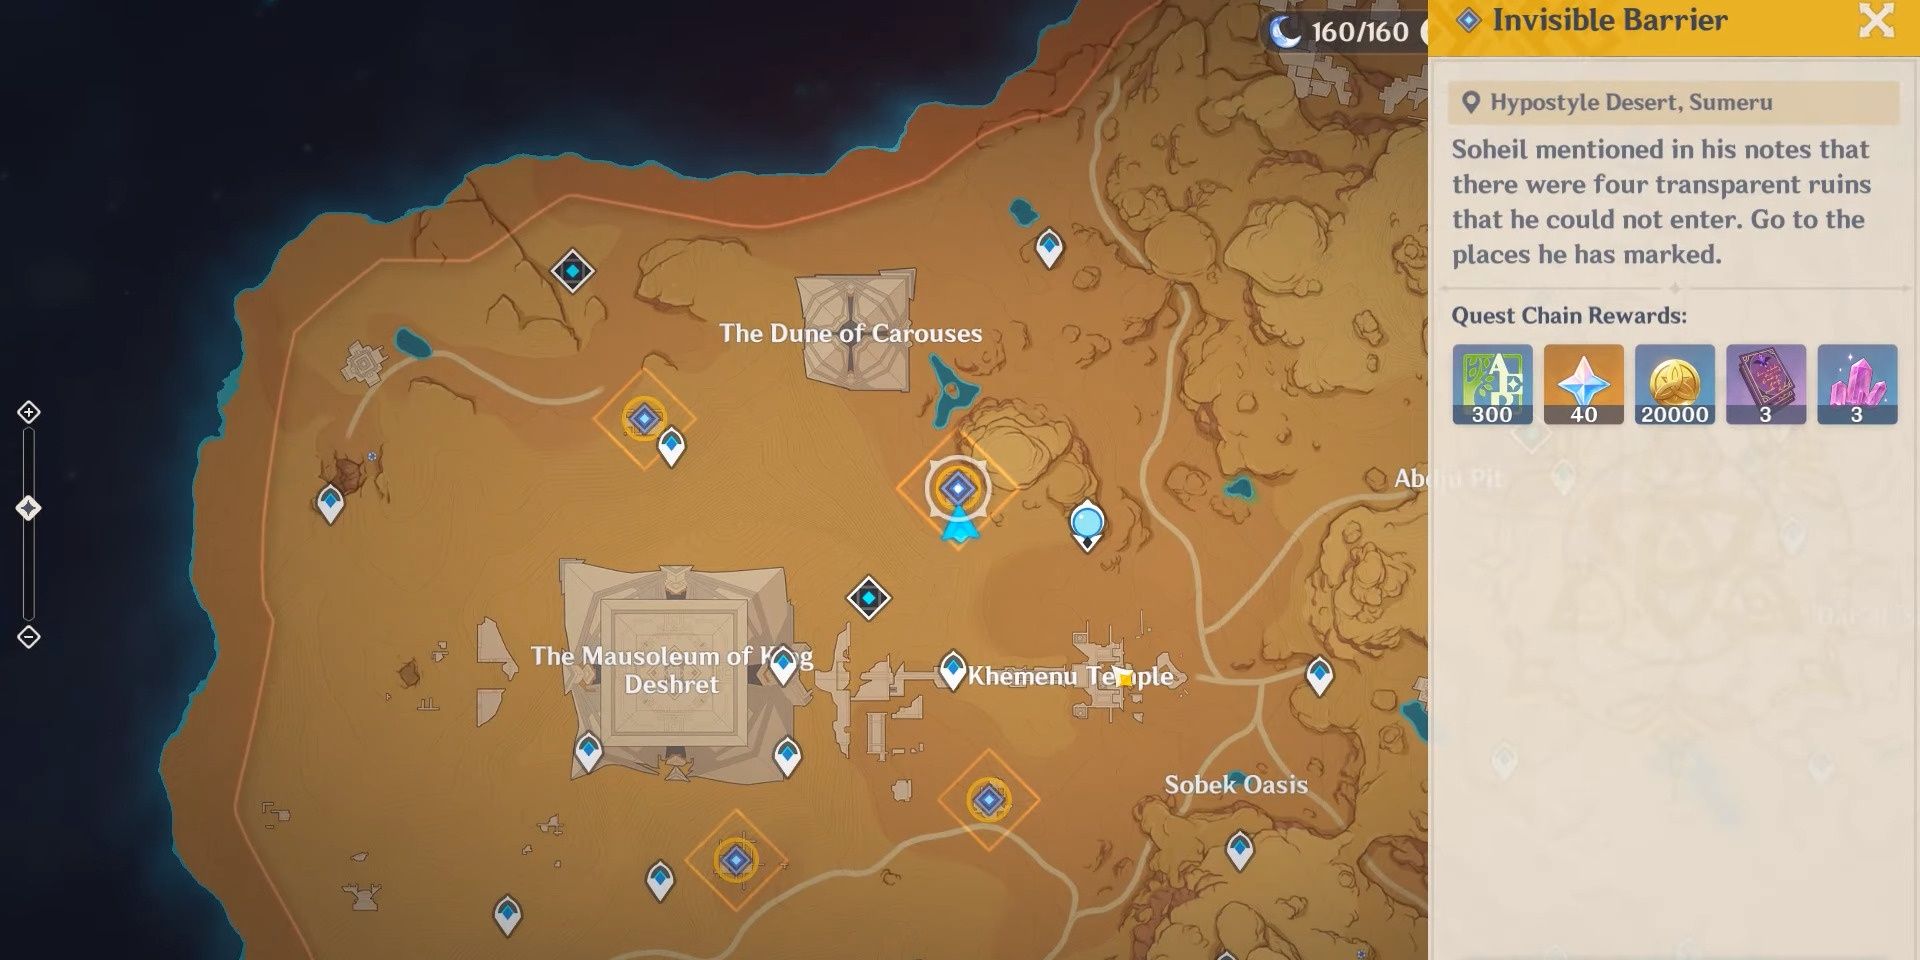 Image of the location on the map for the Invisible Barrier mission in Genshin Impact.